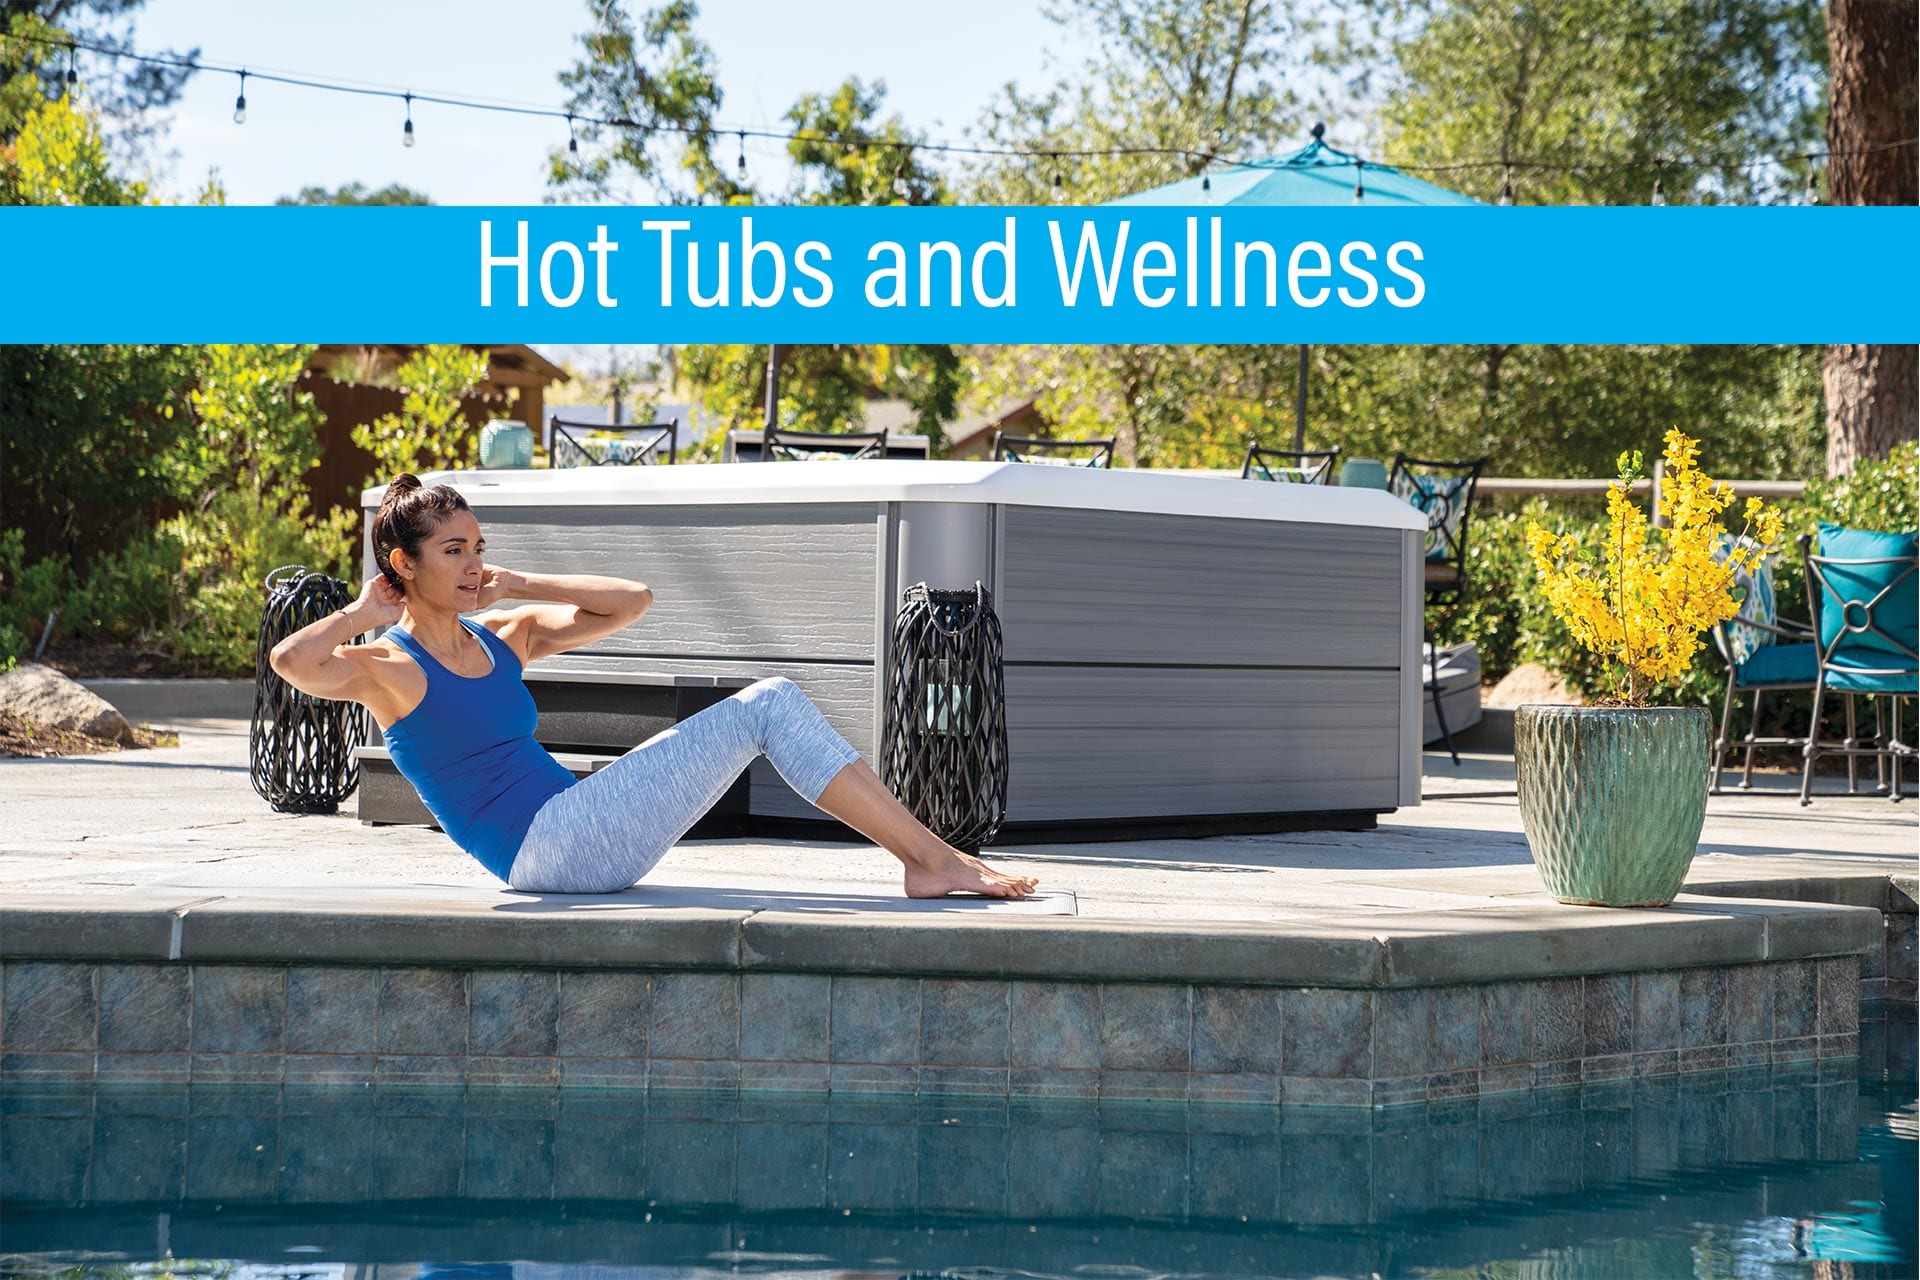 Hot Tubs and Wellness – Take our Wellness Challenge and Be a Lifelong Hot Tubber